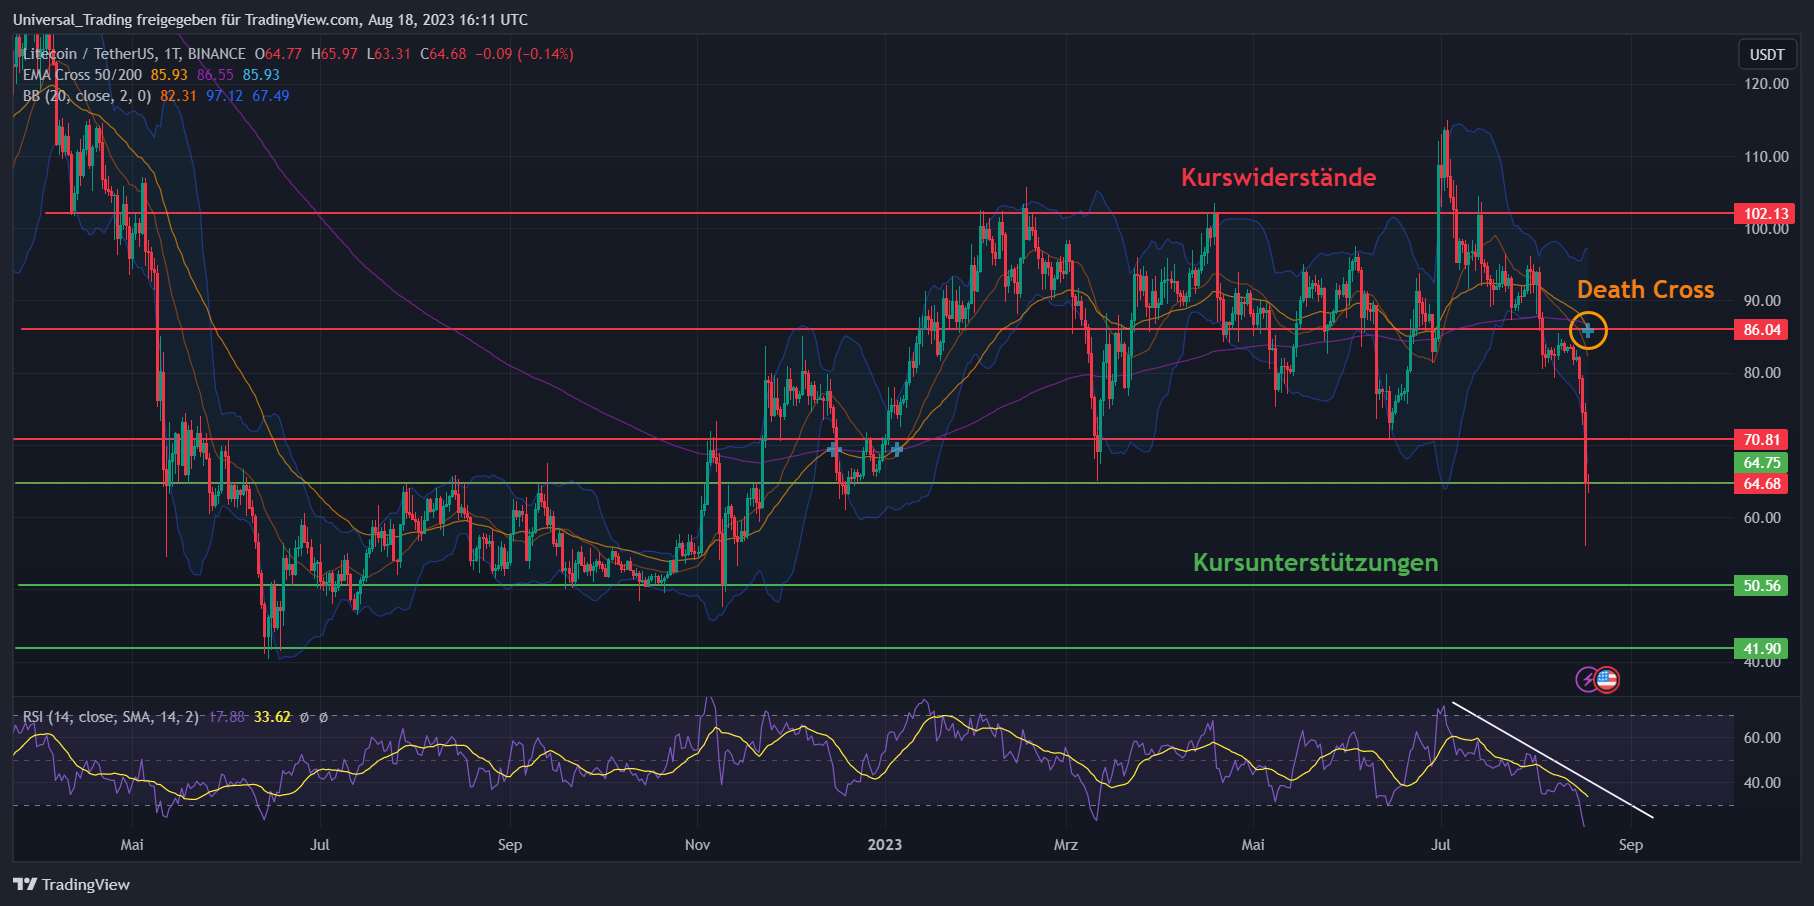 Litecoin (LTC) Kurs Chart in Tagesdarstellung (Stand: 23.08.2023)